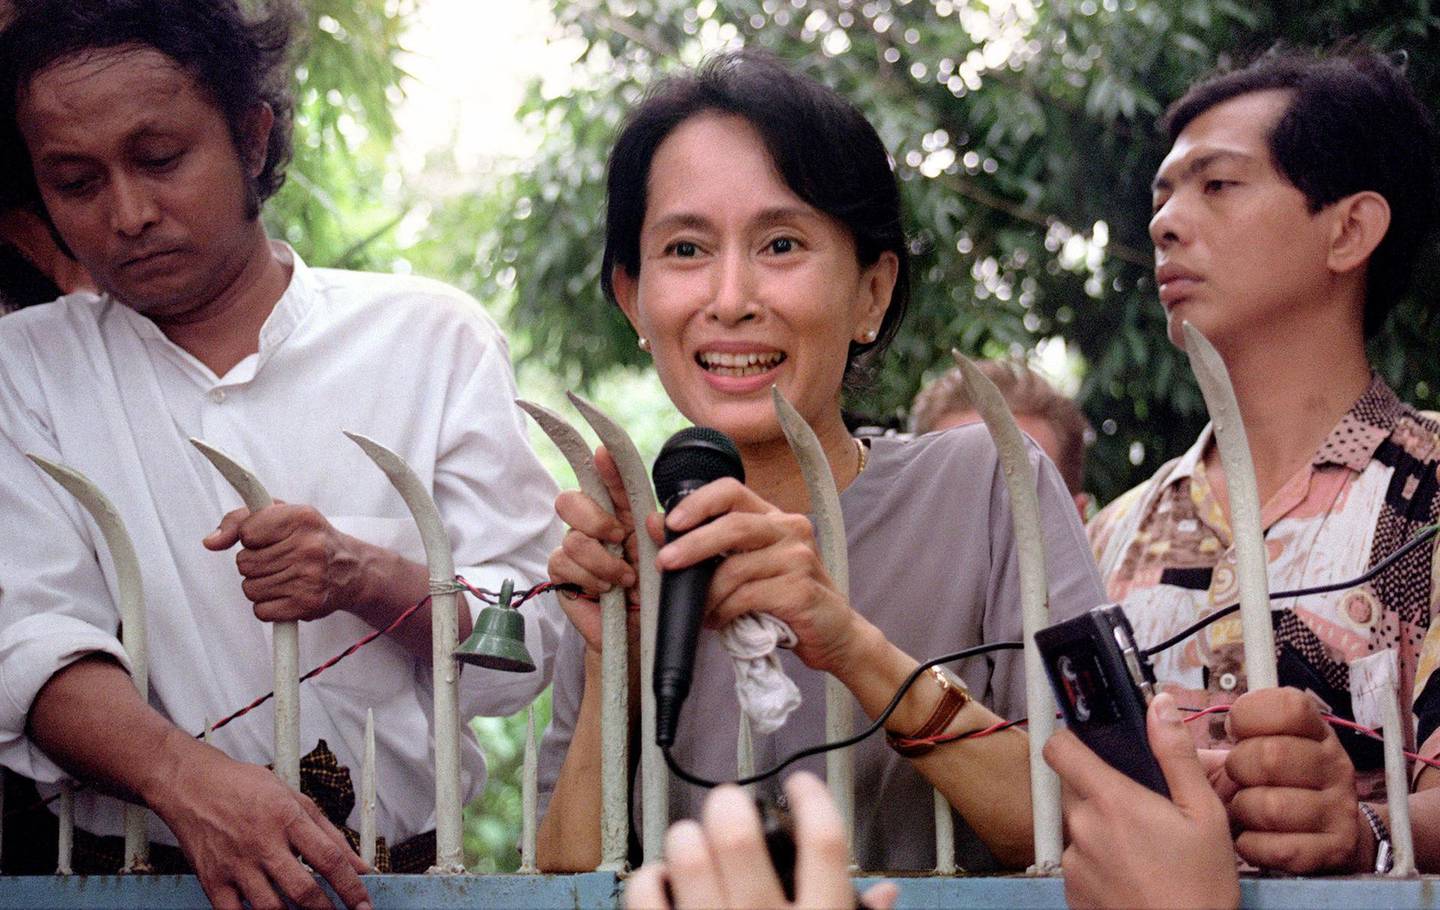 (FILES) In this file photo taken on July 14, 1995, pro-democracy leader Aung San Suu Kyi (C) addresses supporters from the main gate of her family compound in Yangon. Ousted Myanmar leader Aung San Suu Kyi will hear the first testimony against her in a junta court on June 14, 2021, more than four months after a military coup. / AFP / Manny CENETA
